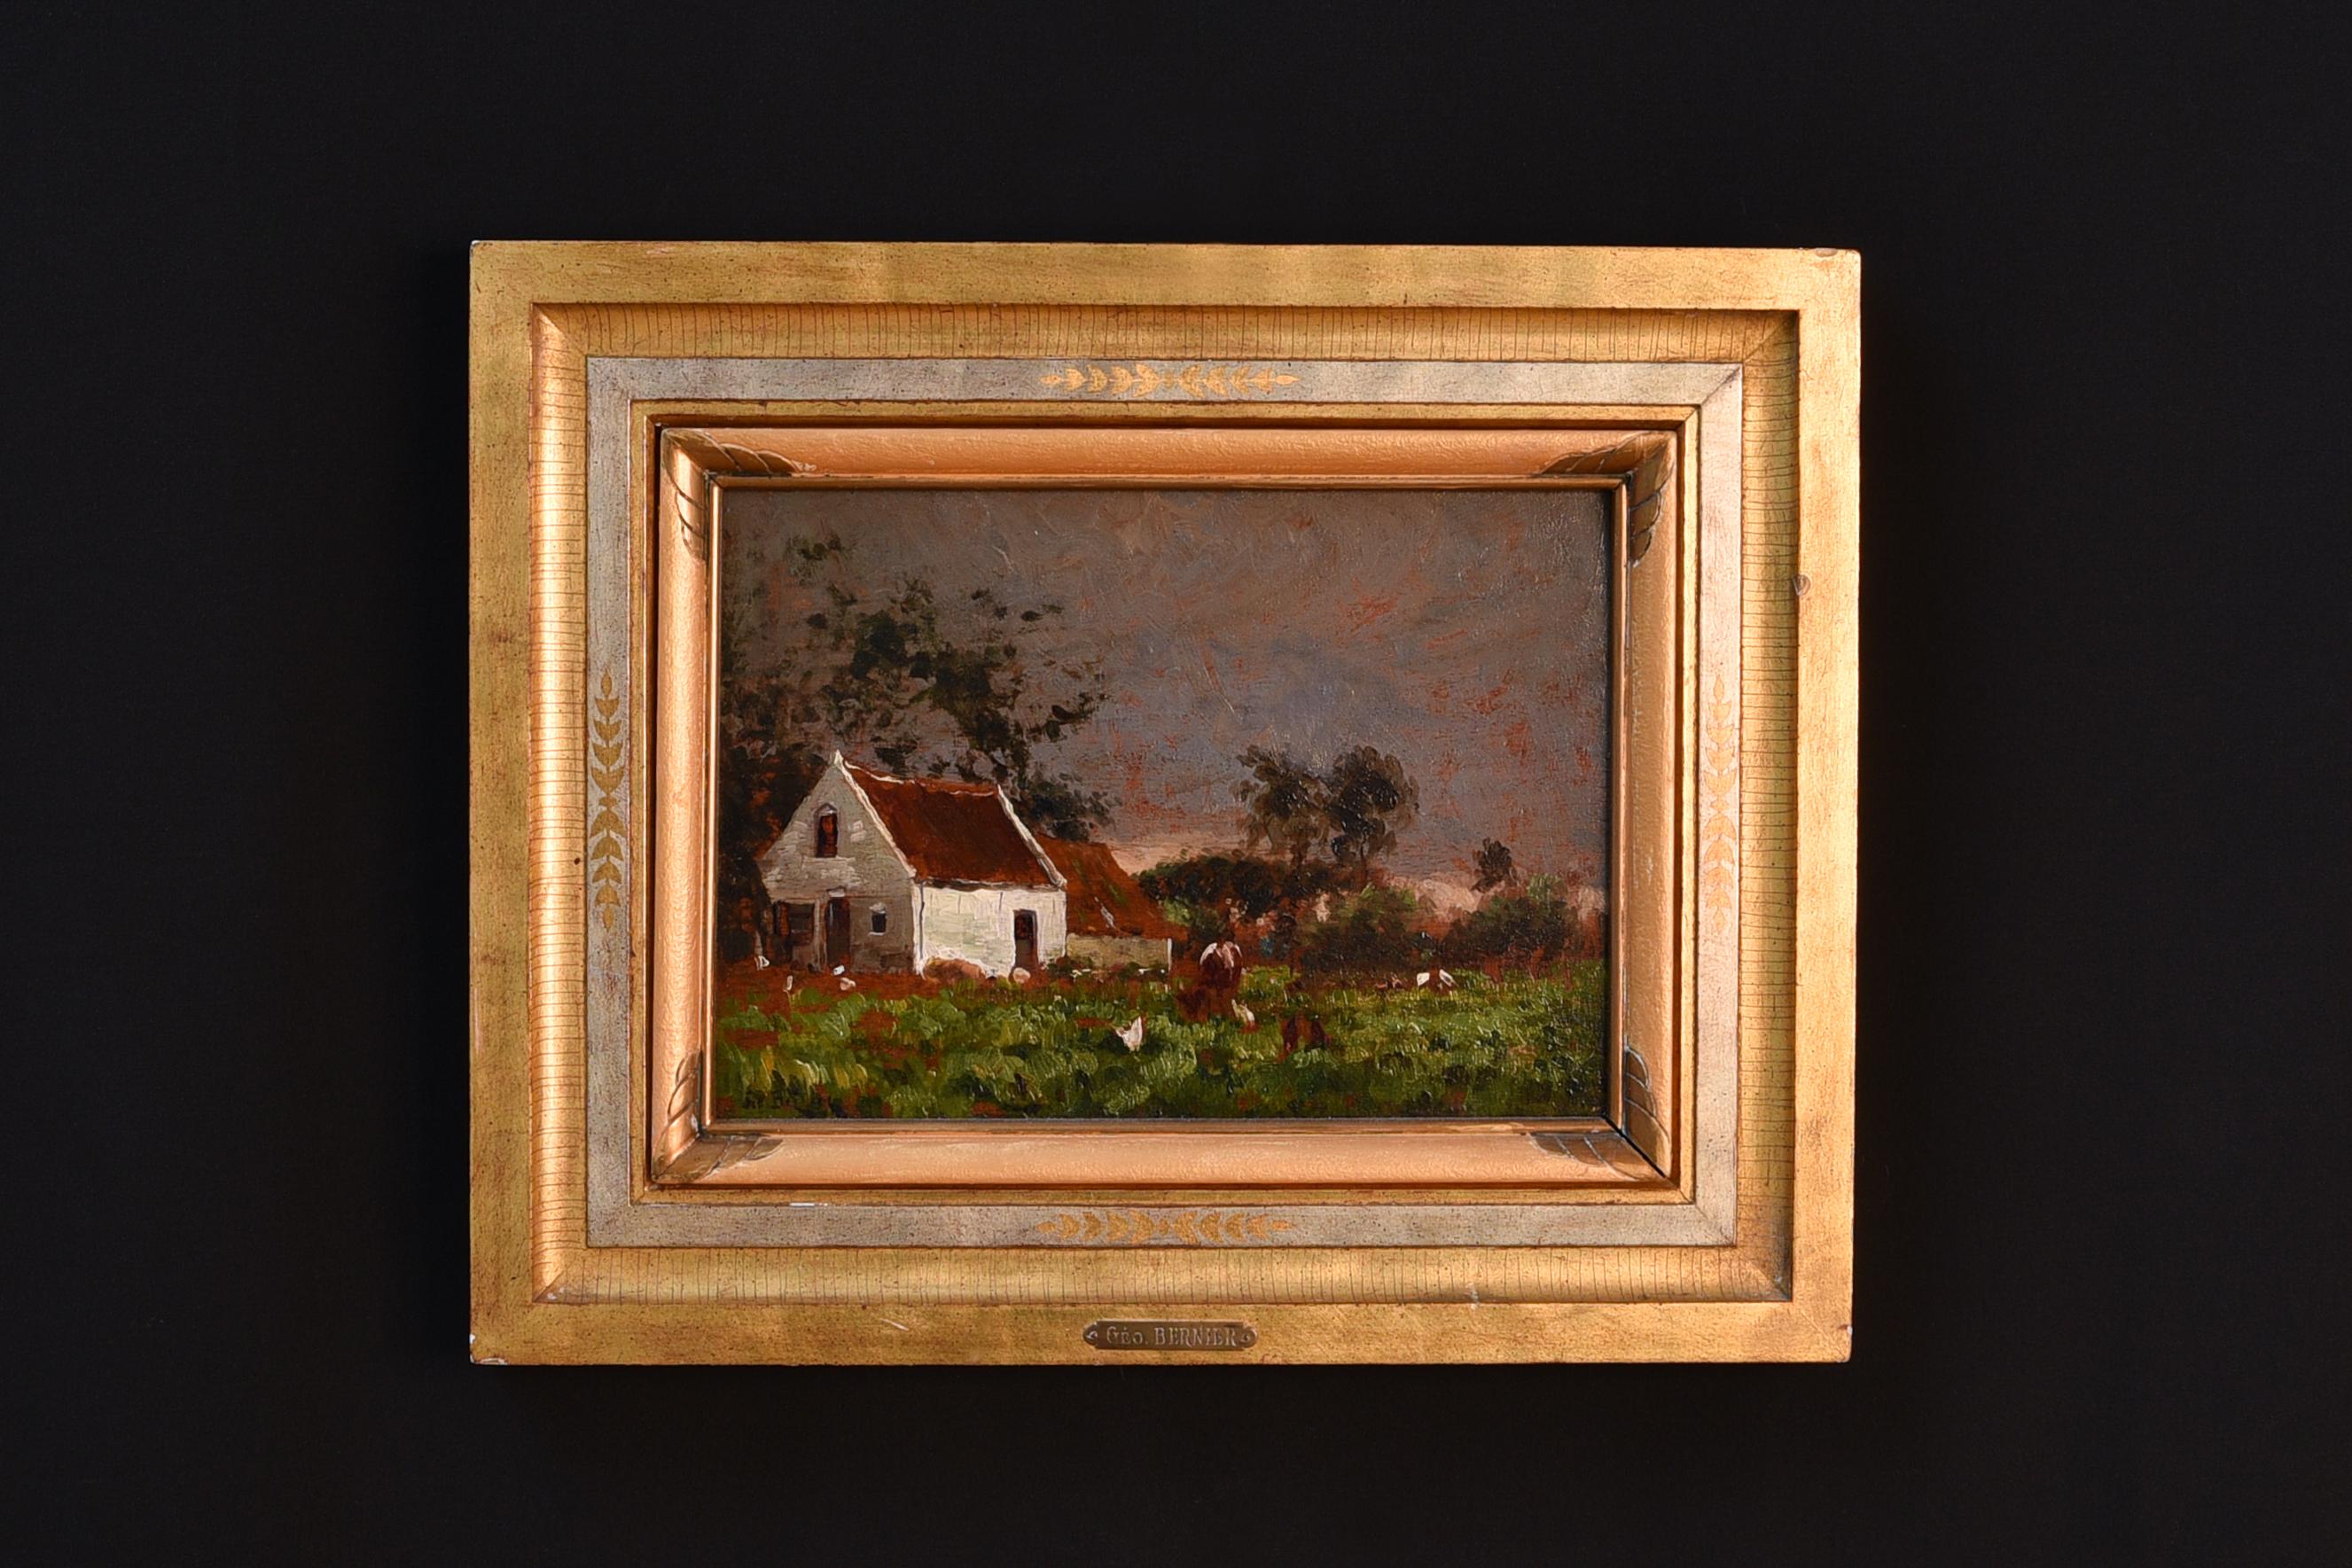 Landscape with small farm and cow. Géo Bernier (Namen, Belgium 1862-1918) is a specialist painter of landscapes, horses and cows. His work is part of collections in Groeningemuseum Brugge, MSK Elsene, Museum M Leuven. Original frame and signed. 